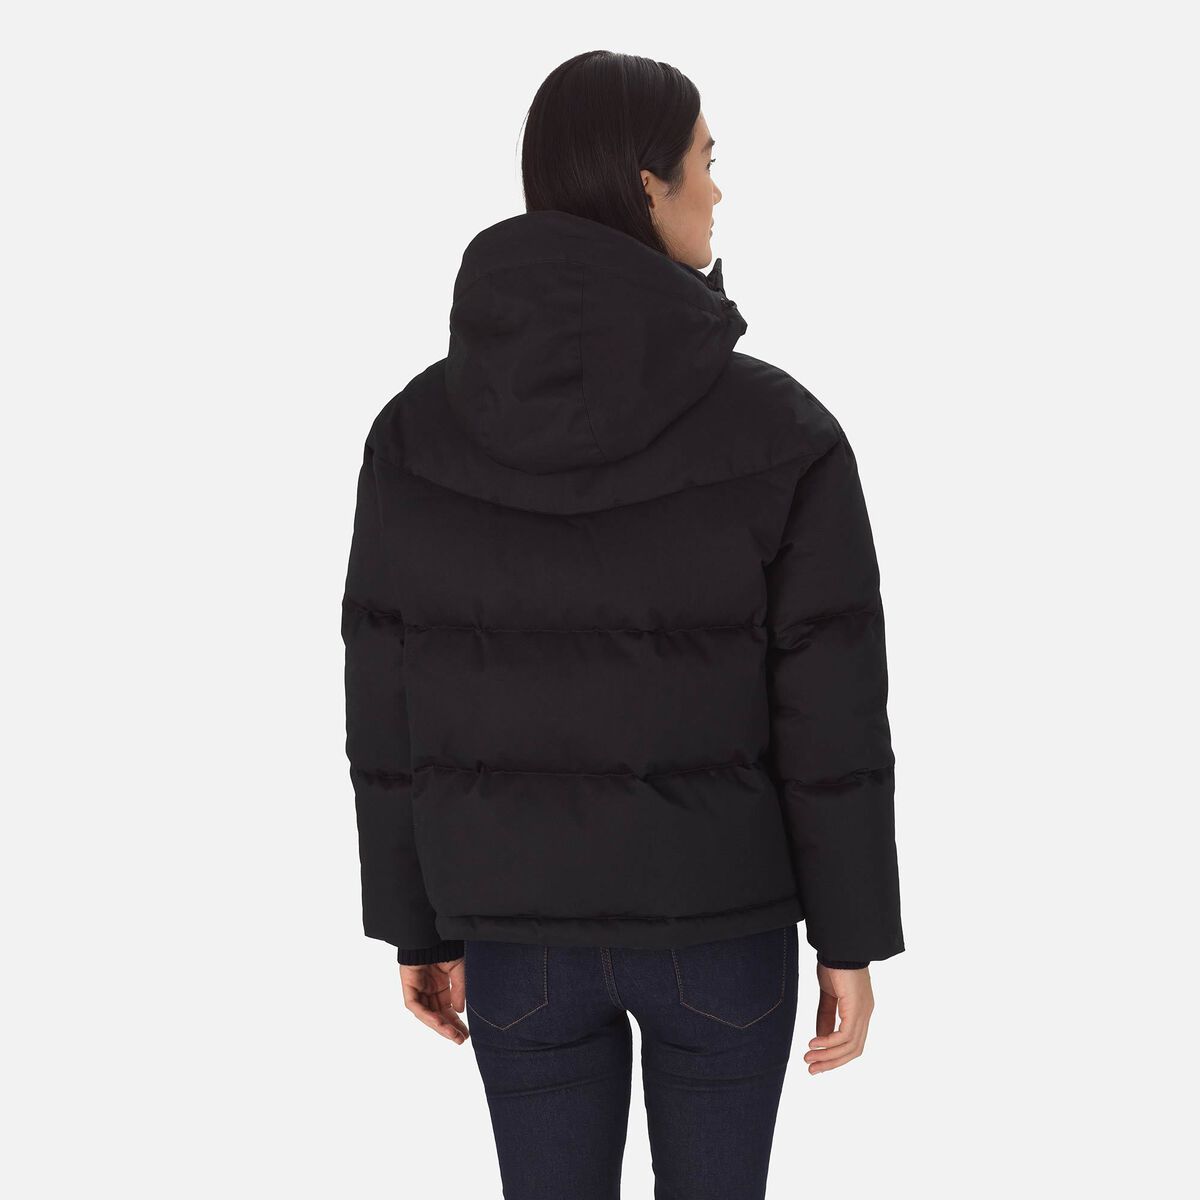 Women's Real Down Jacket